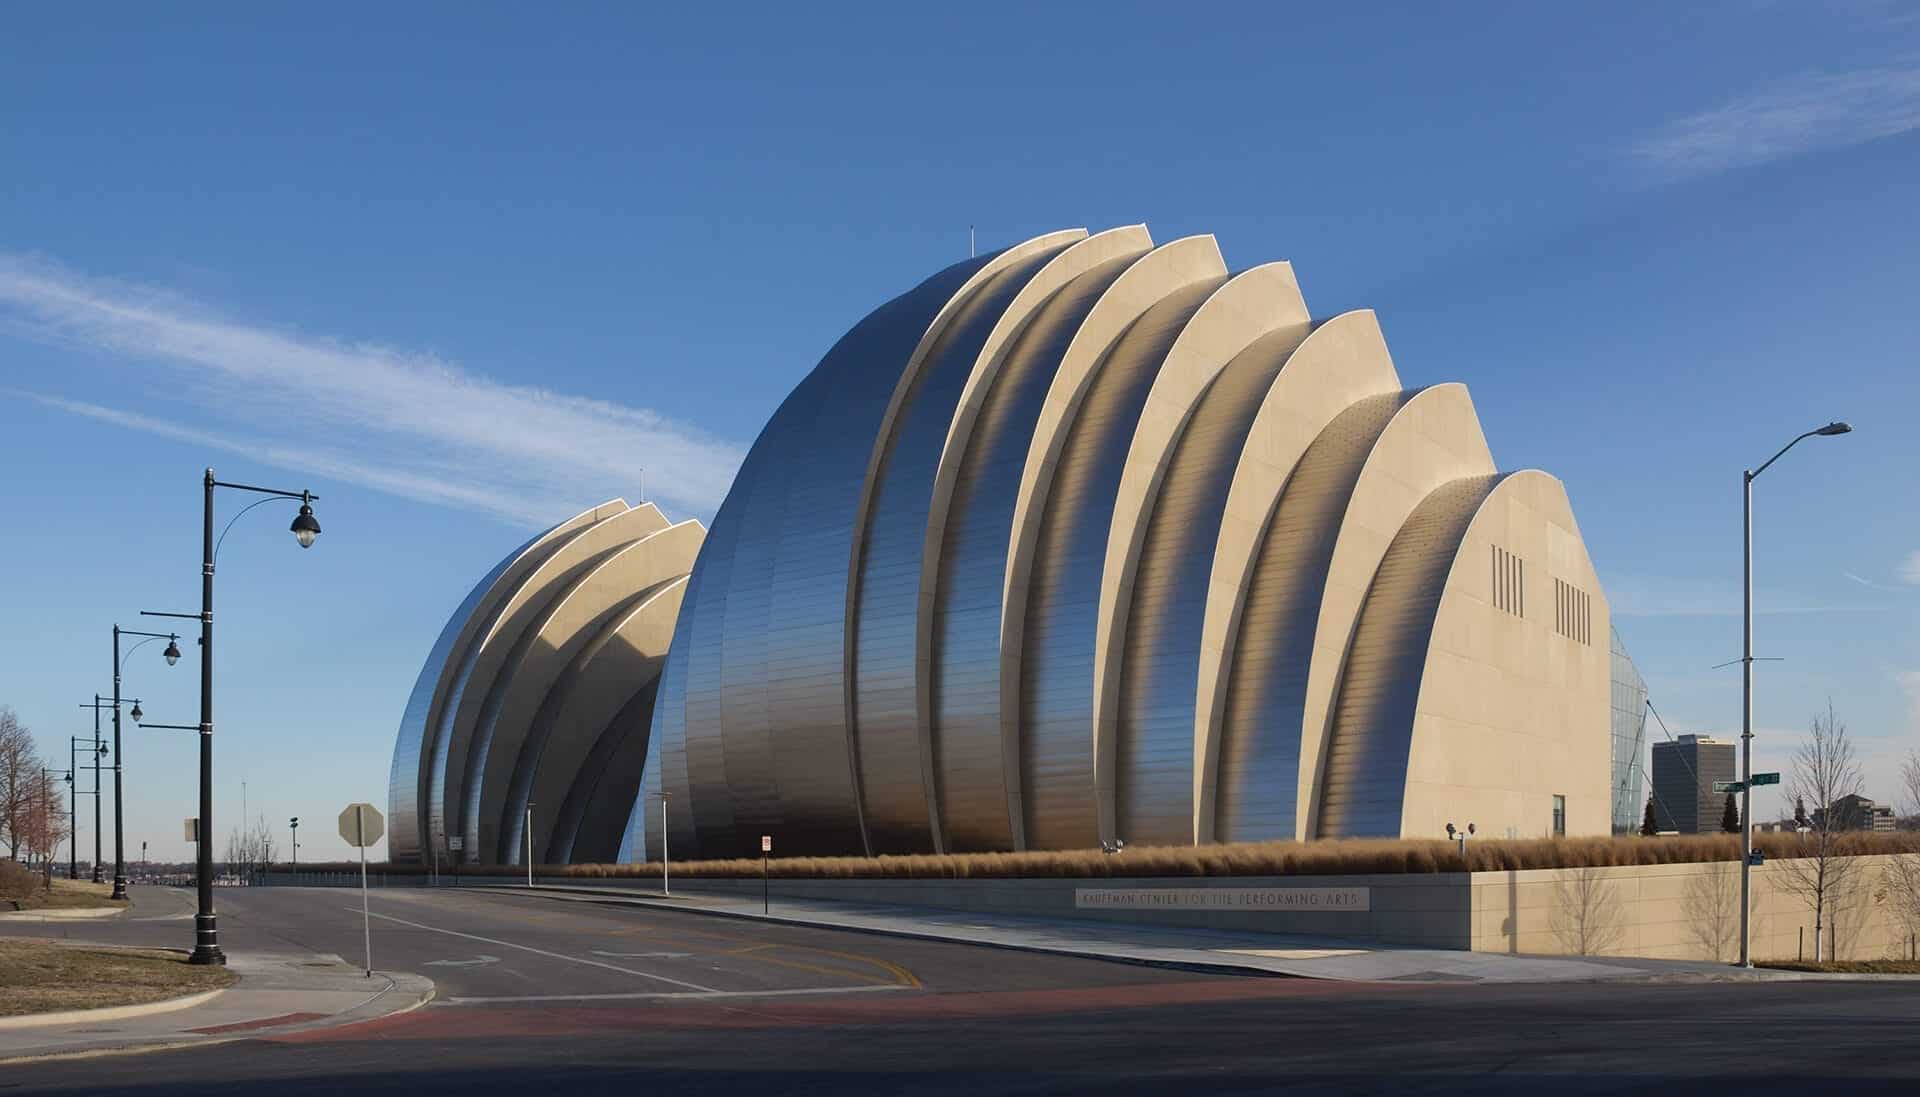 Kansas City's Kauffman Performing Arts Center uses ZEPPS for its curved facade and roof.